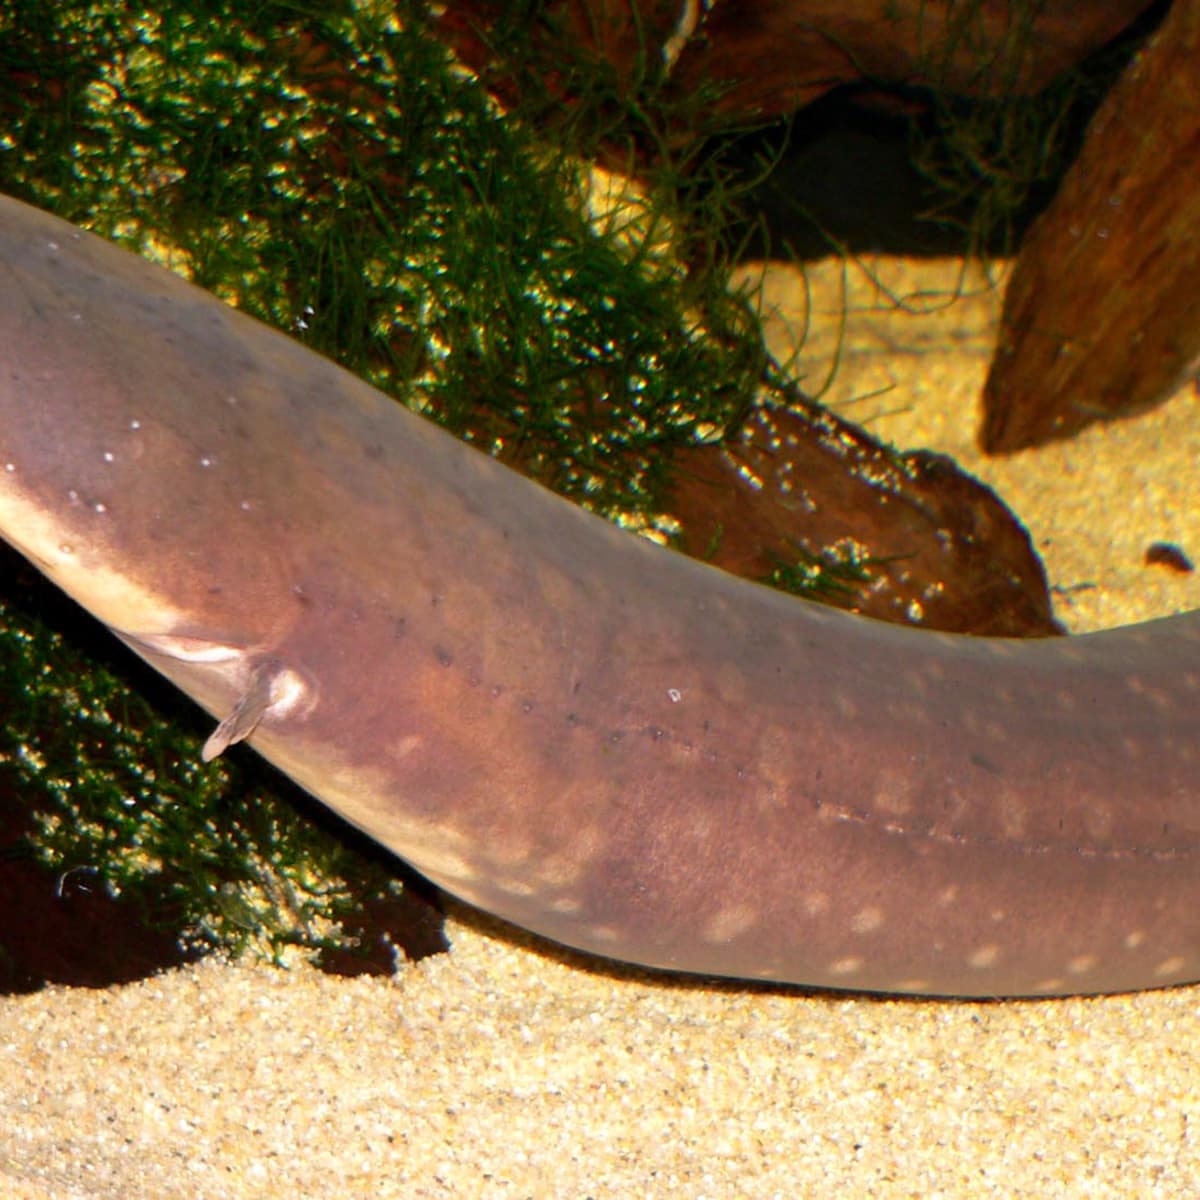 Electric Eel - The Most Powerful Electric Fish - HubPages